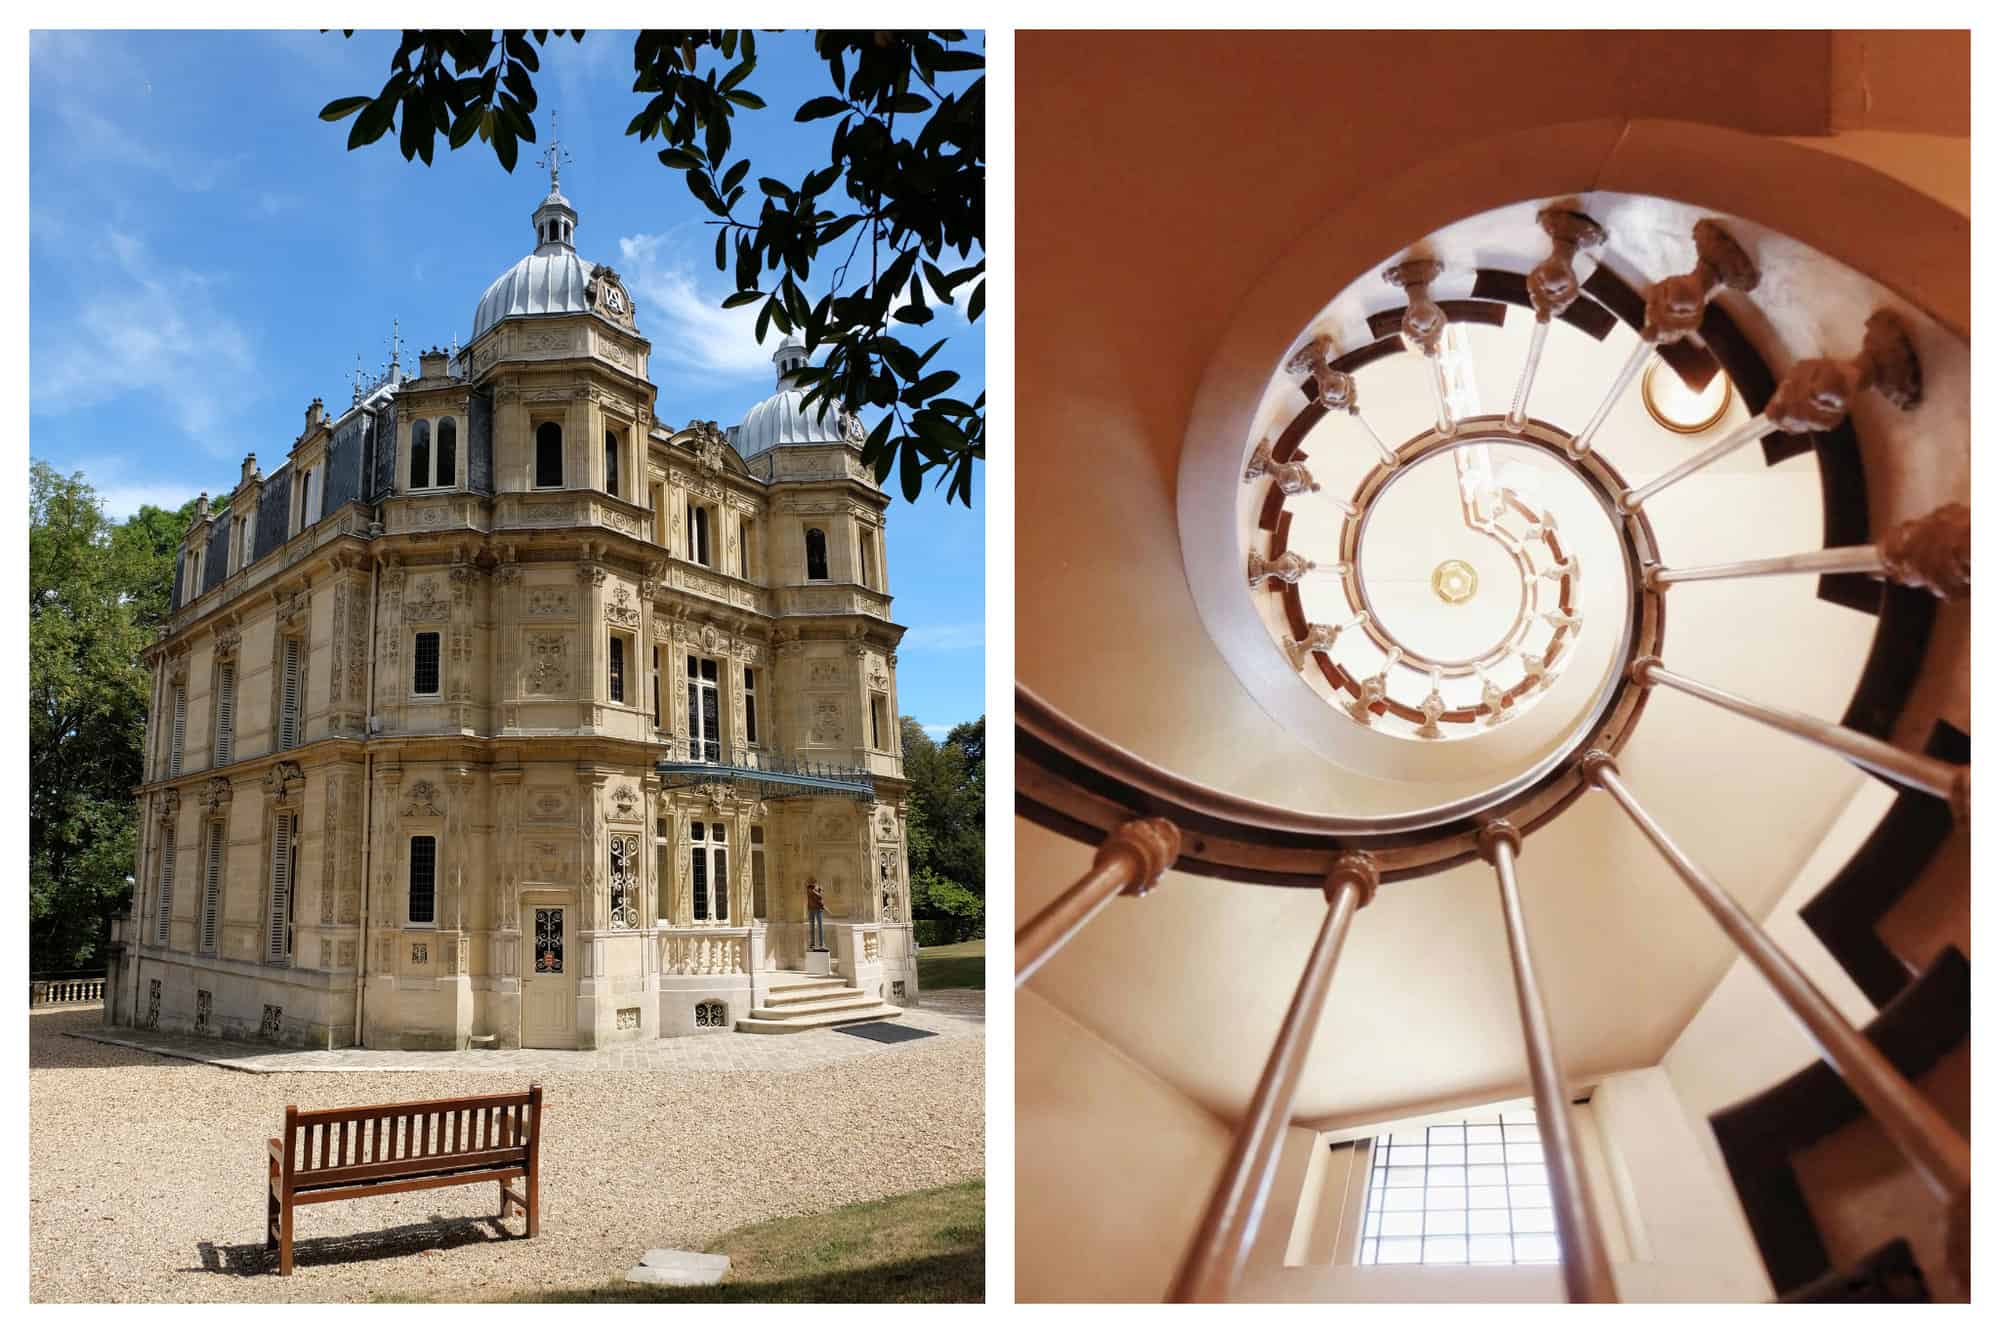 Left: A picture of Château Monte-Cristo in Paris, with blue sky in the background, taken from a low angle. Right: A picture of a spiral staircase inside Château Monte-Cristo in Paris.